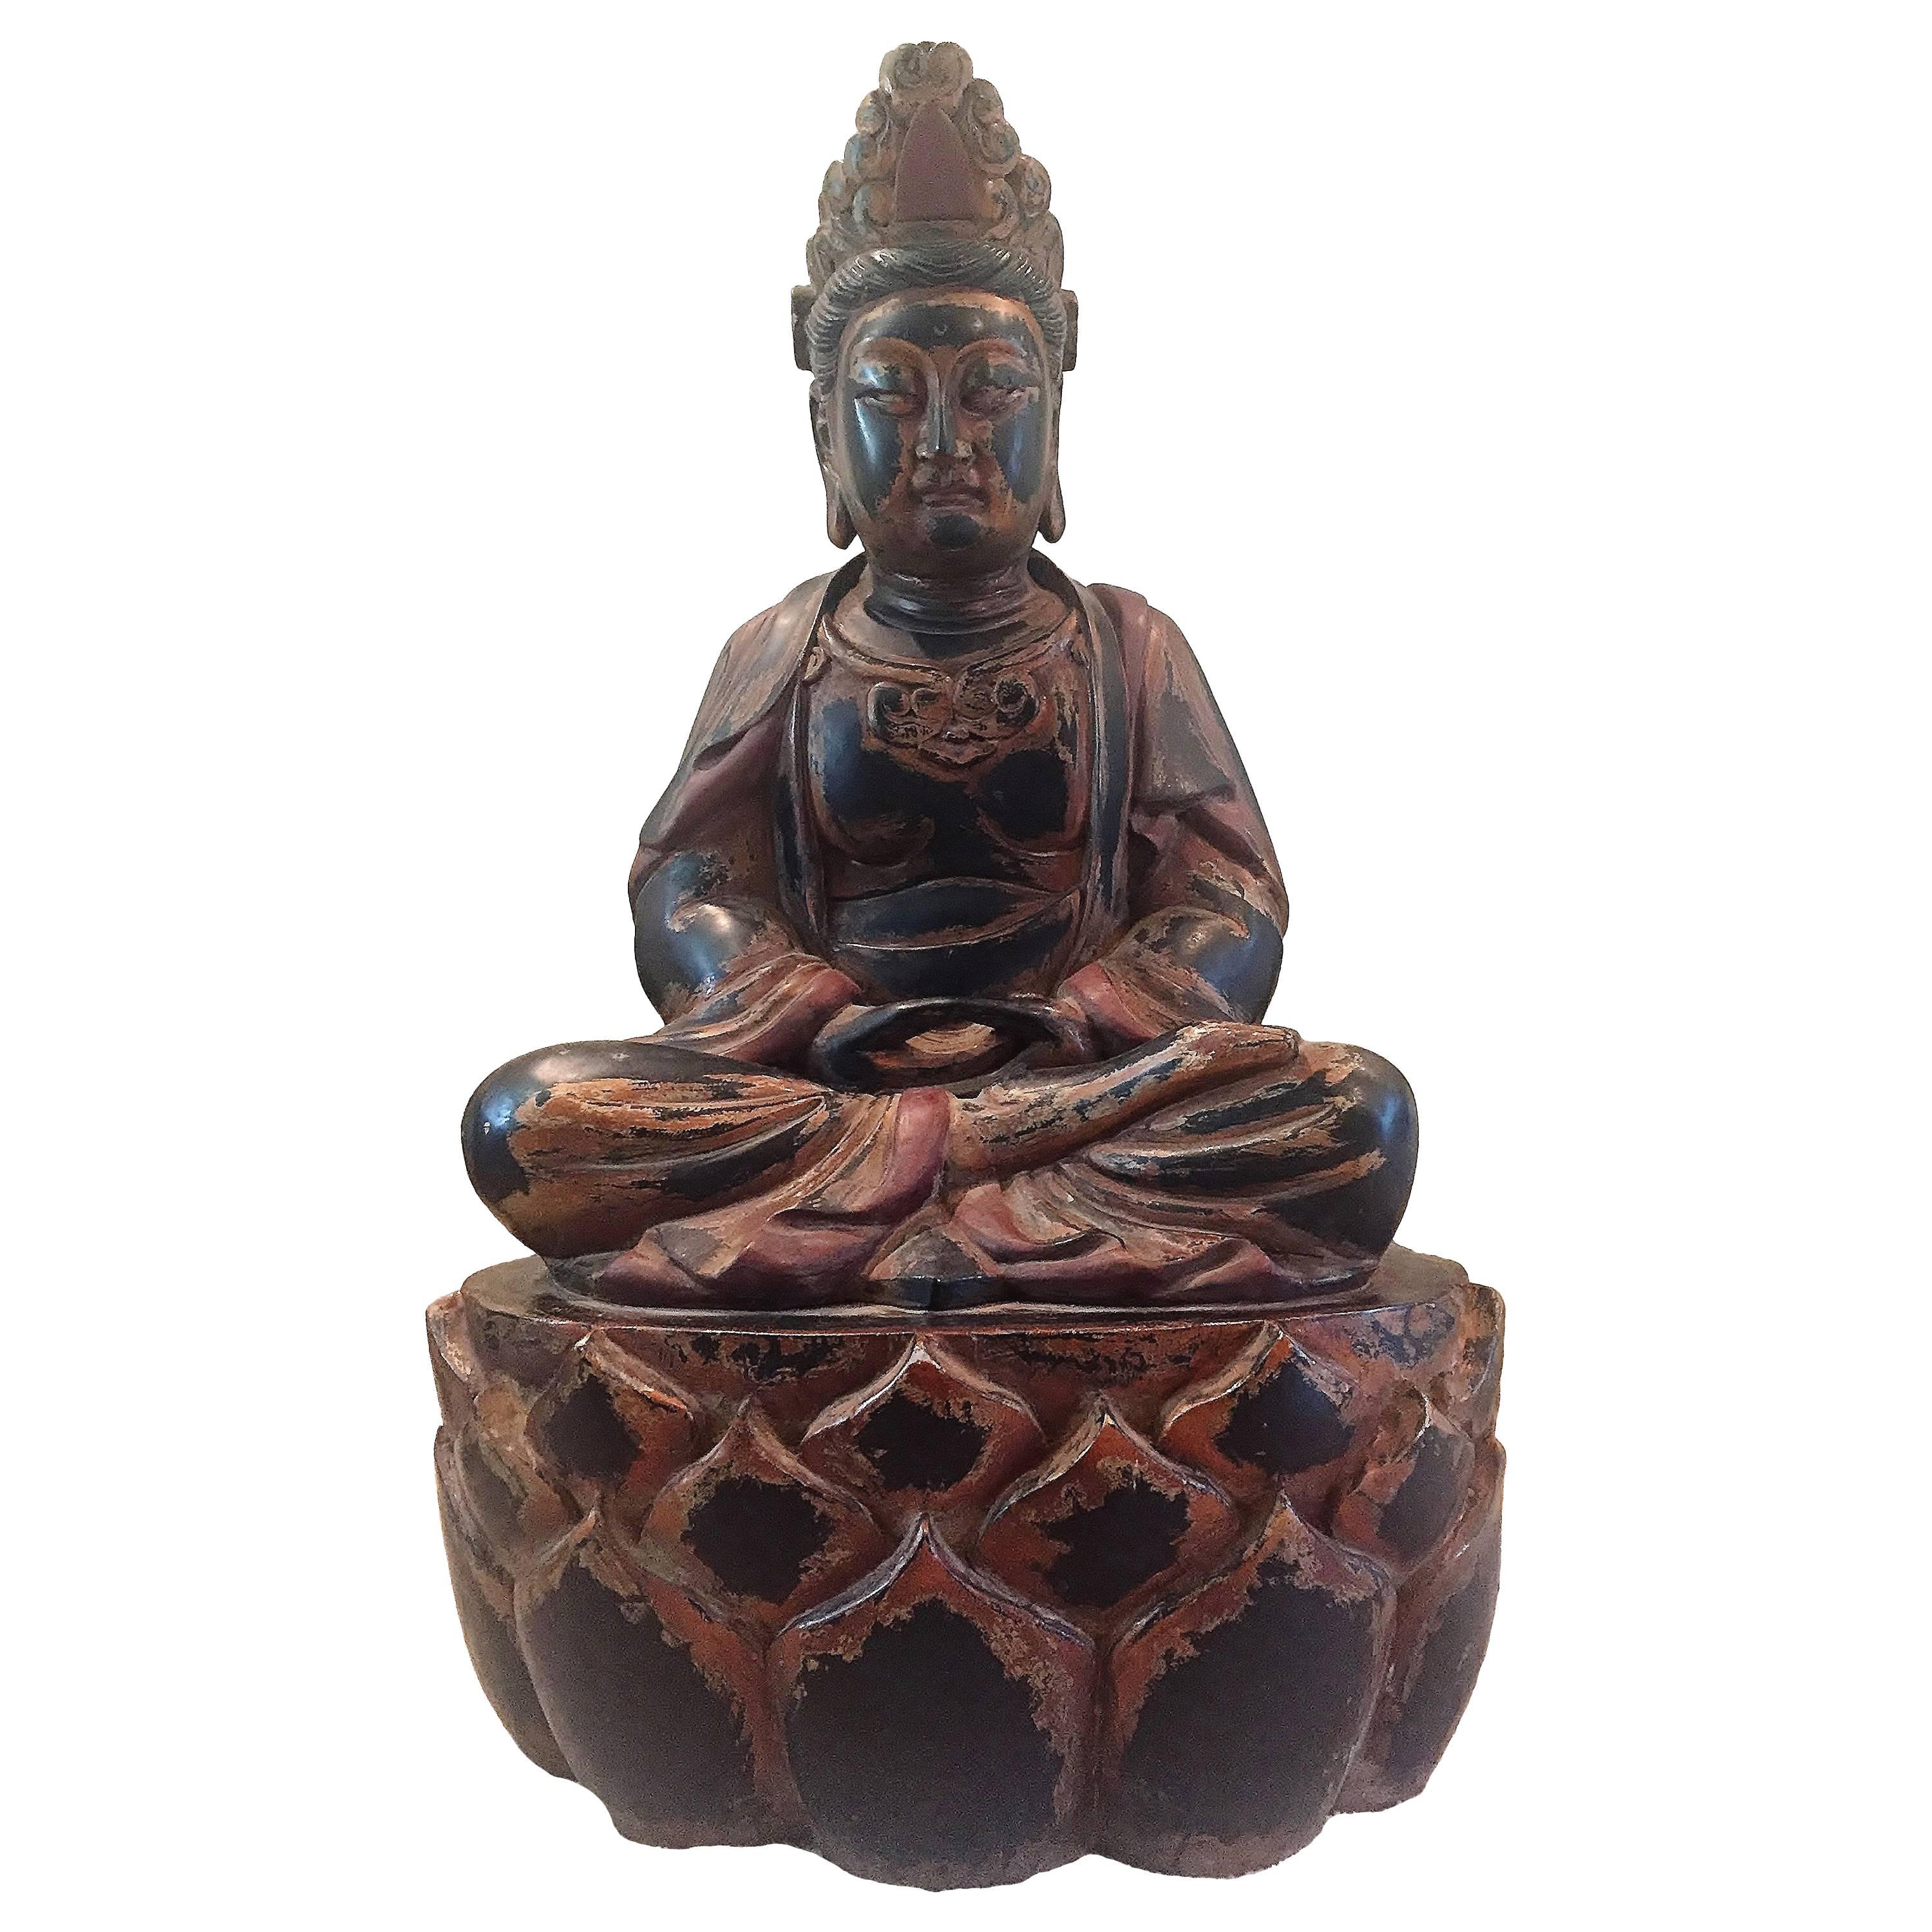 Huge 40" Tall Solid Wood Buddha Statue For Sale